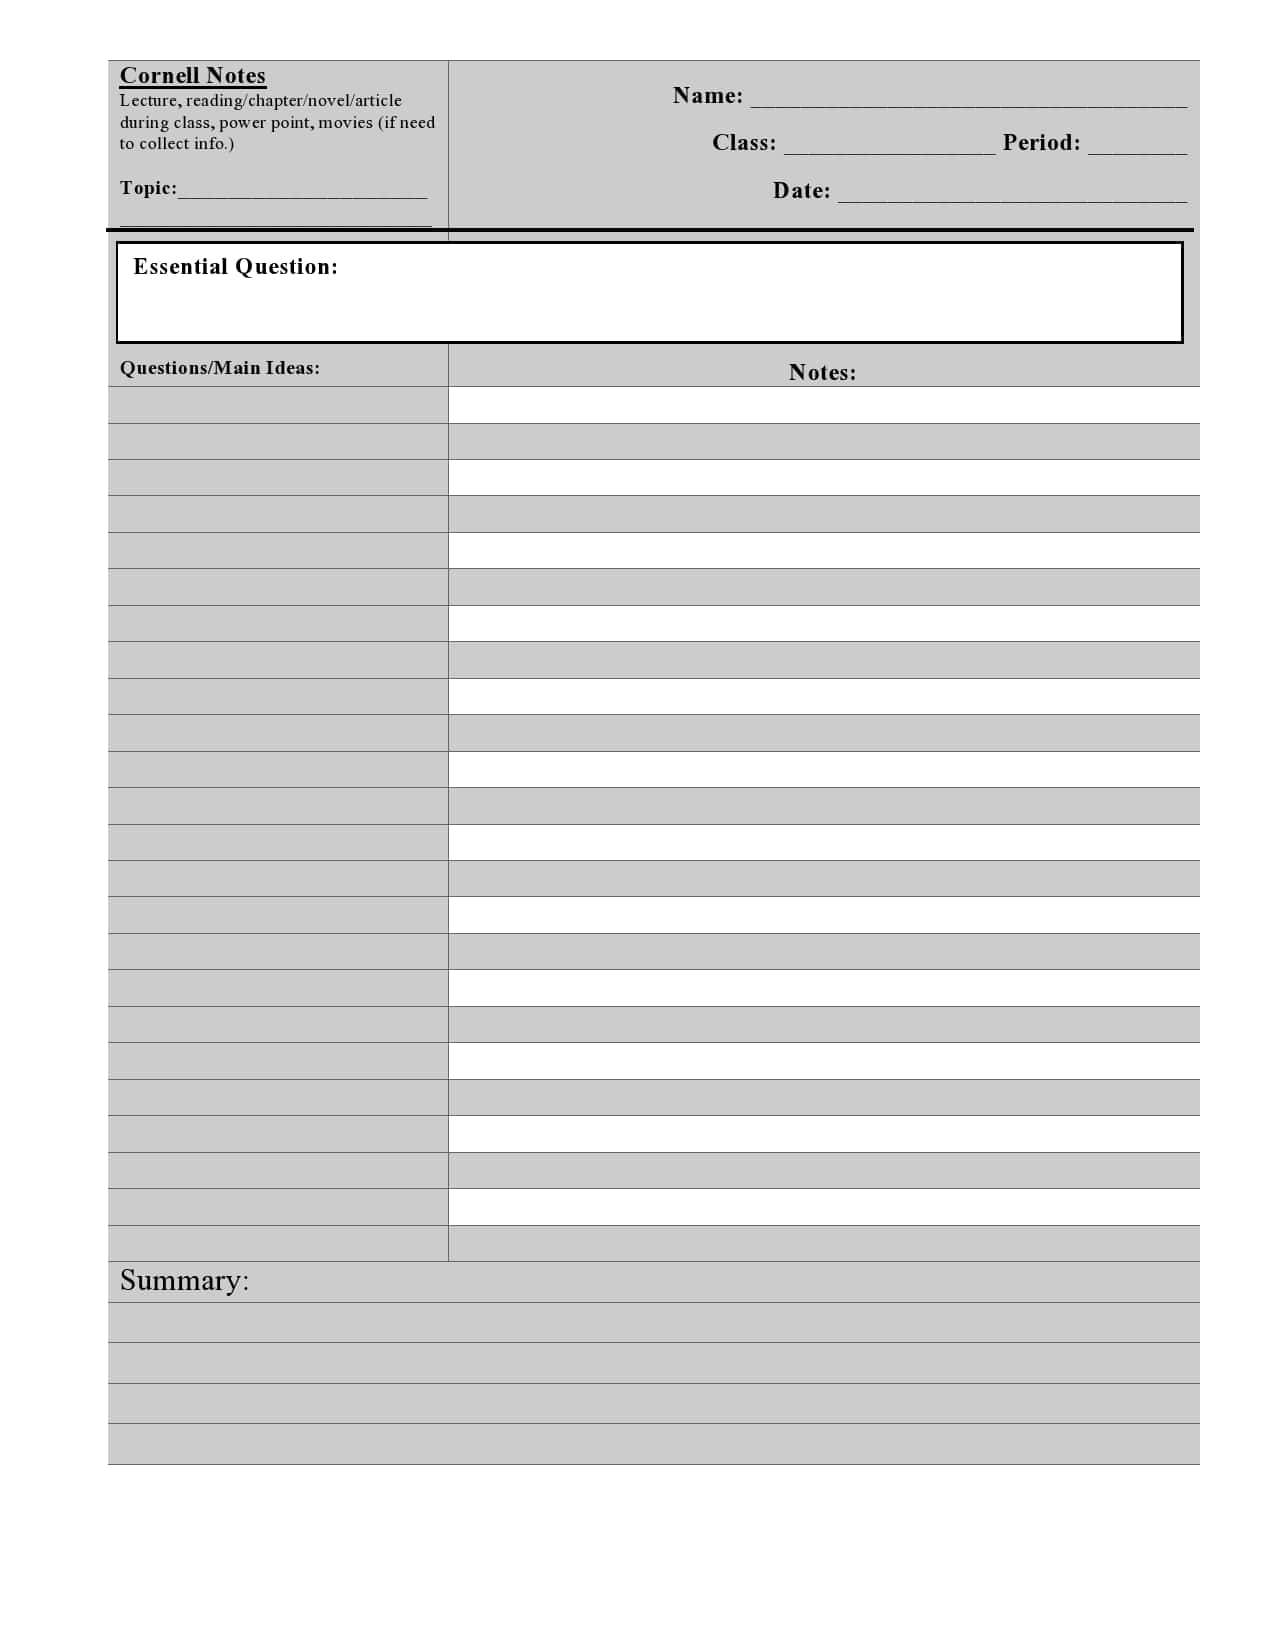 20 Printable Cornell Notes Templates [Free] - TemplateArchive Regarding Cornell Note Taking Template Word